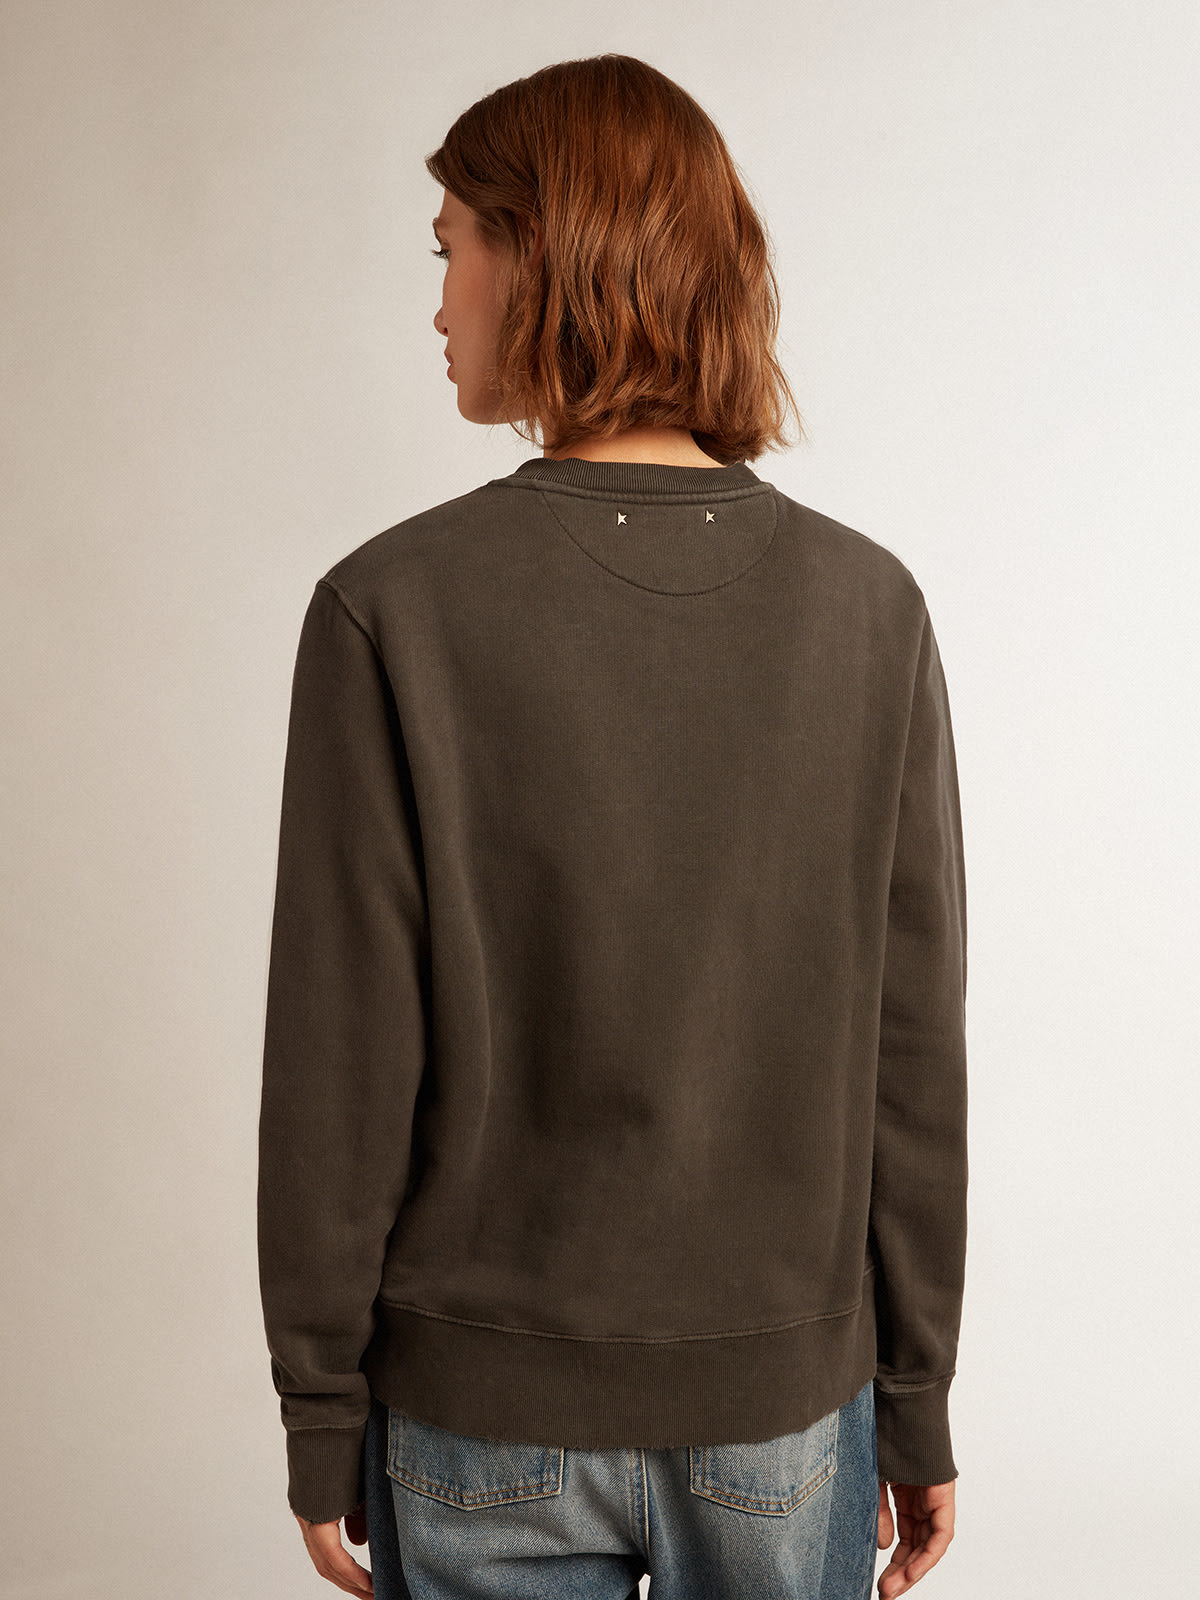 Golden Goose - Golden Collection sweatshirt in anthracite gray with cabochon crystals in 